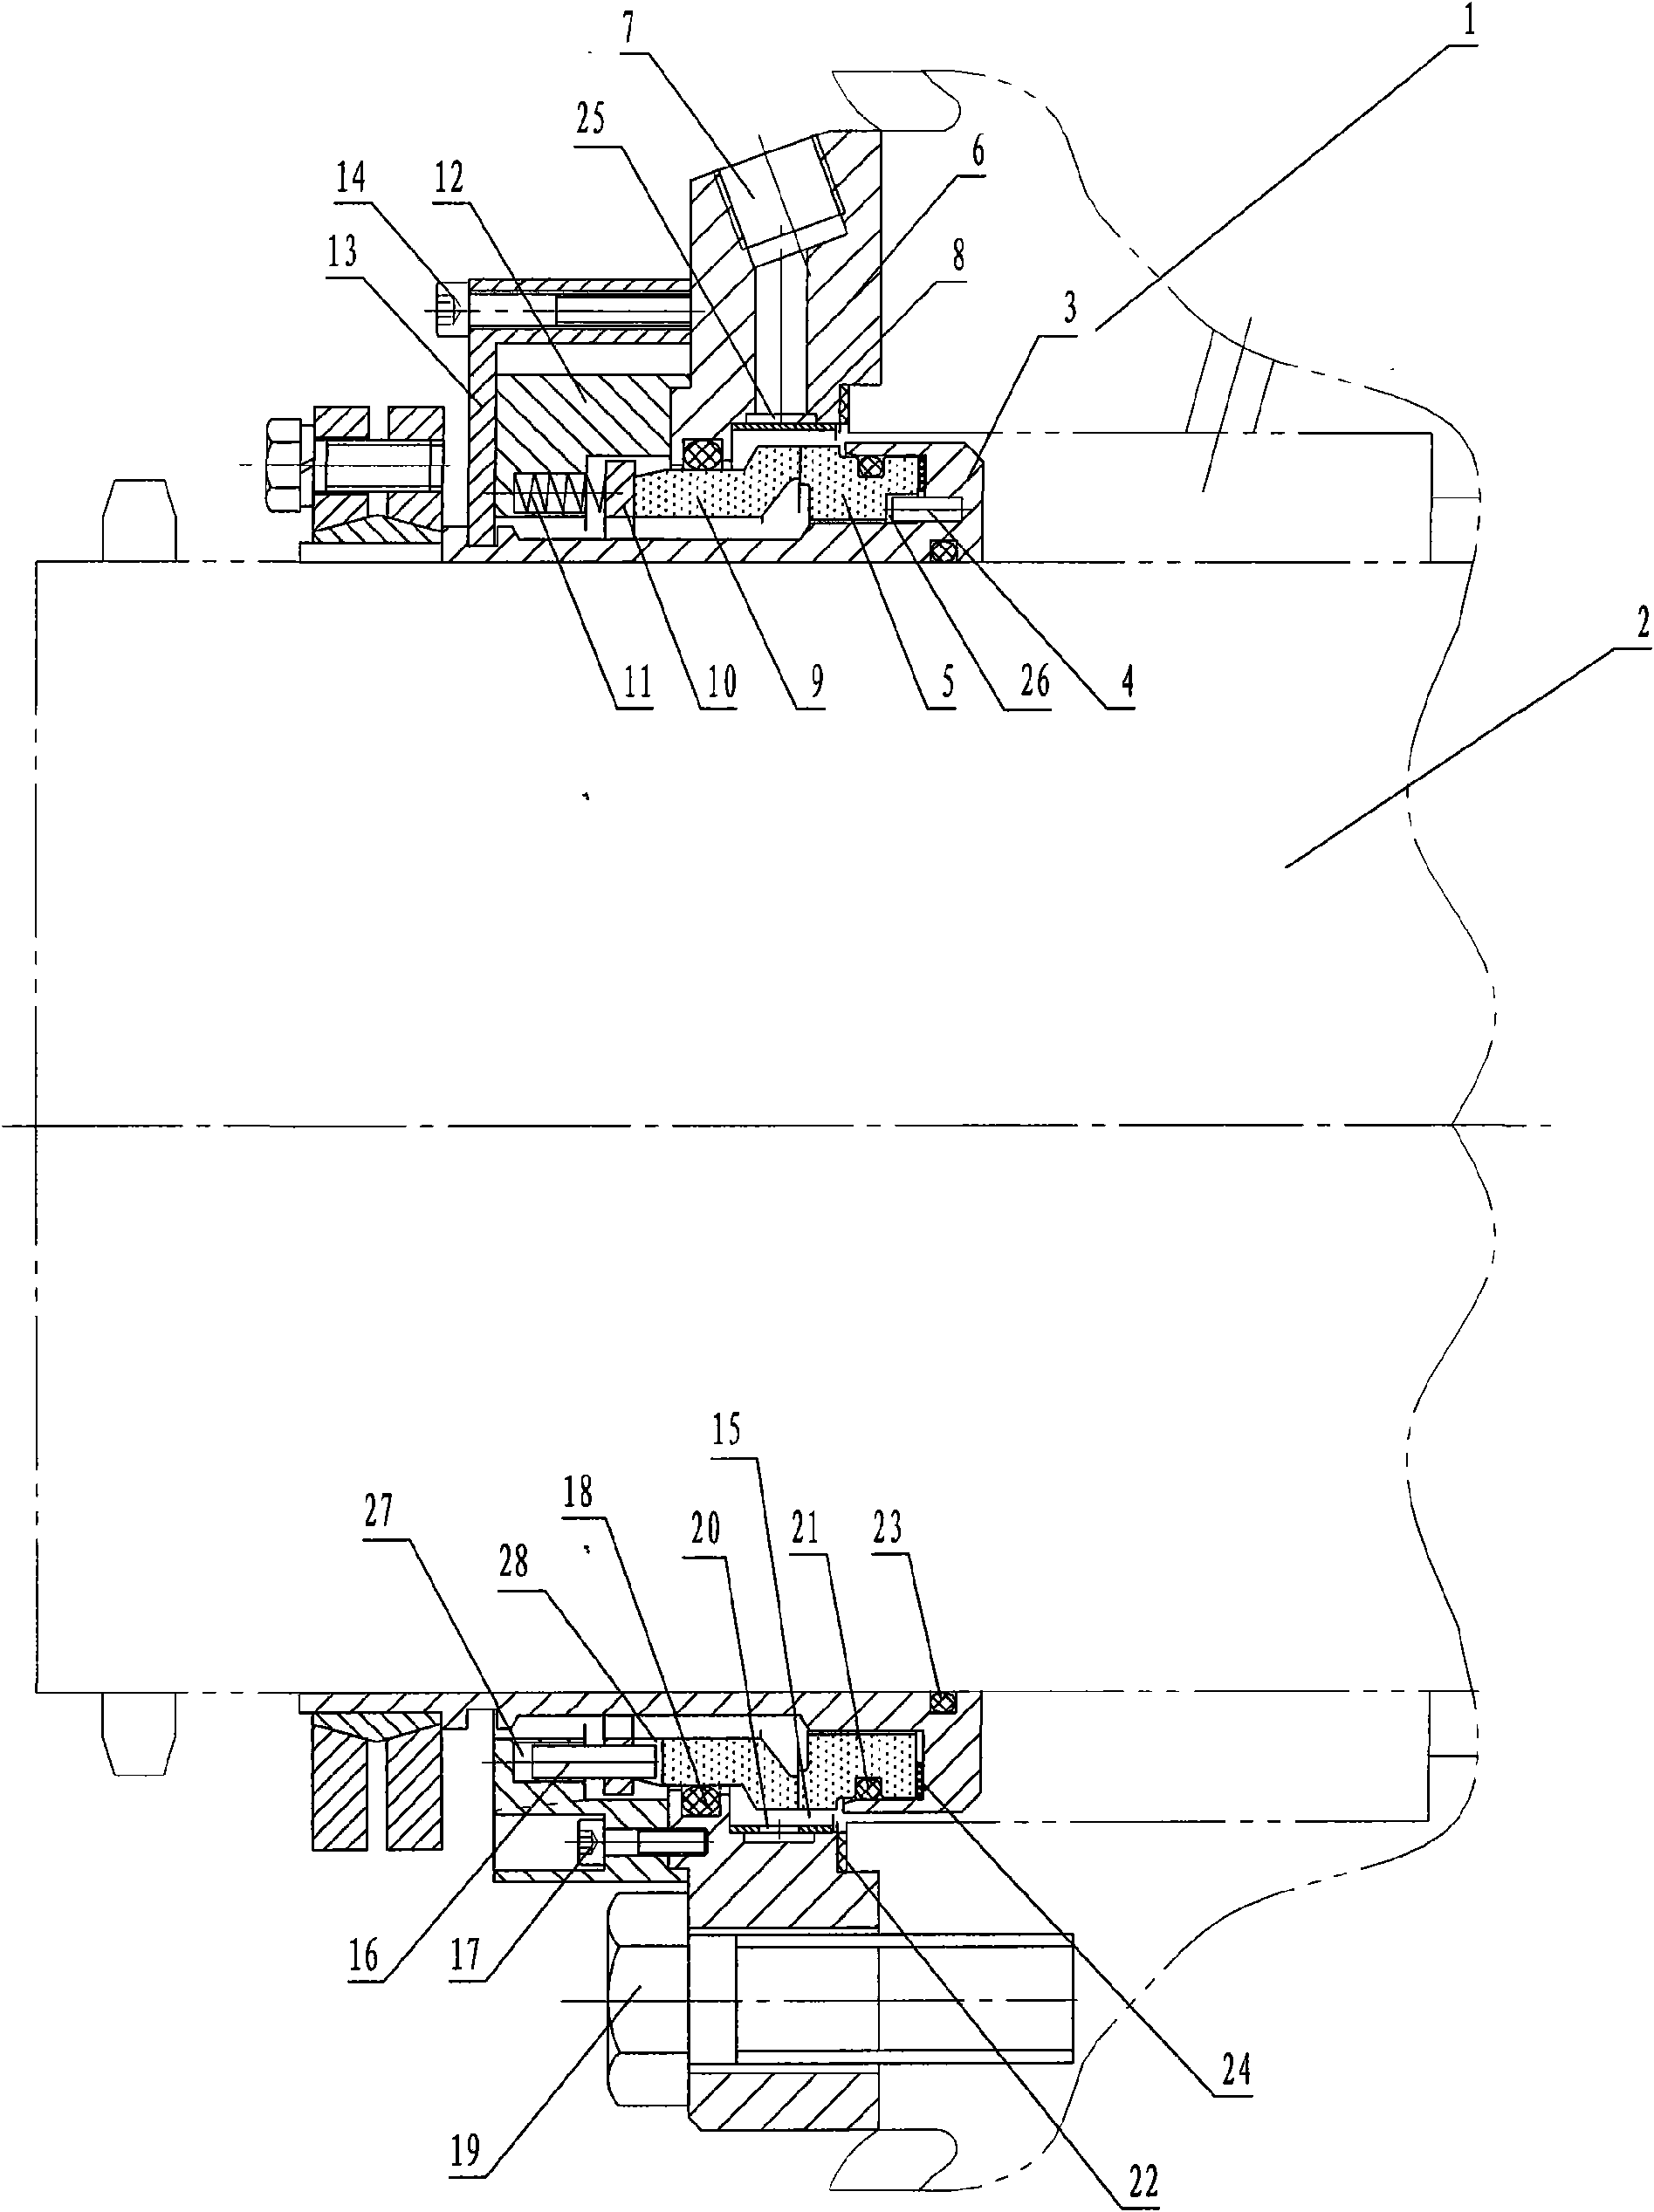 Mechanically sealing device for main circulating pump for seawater desulfuration